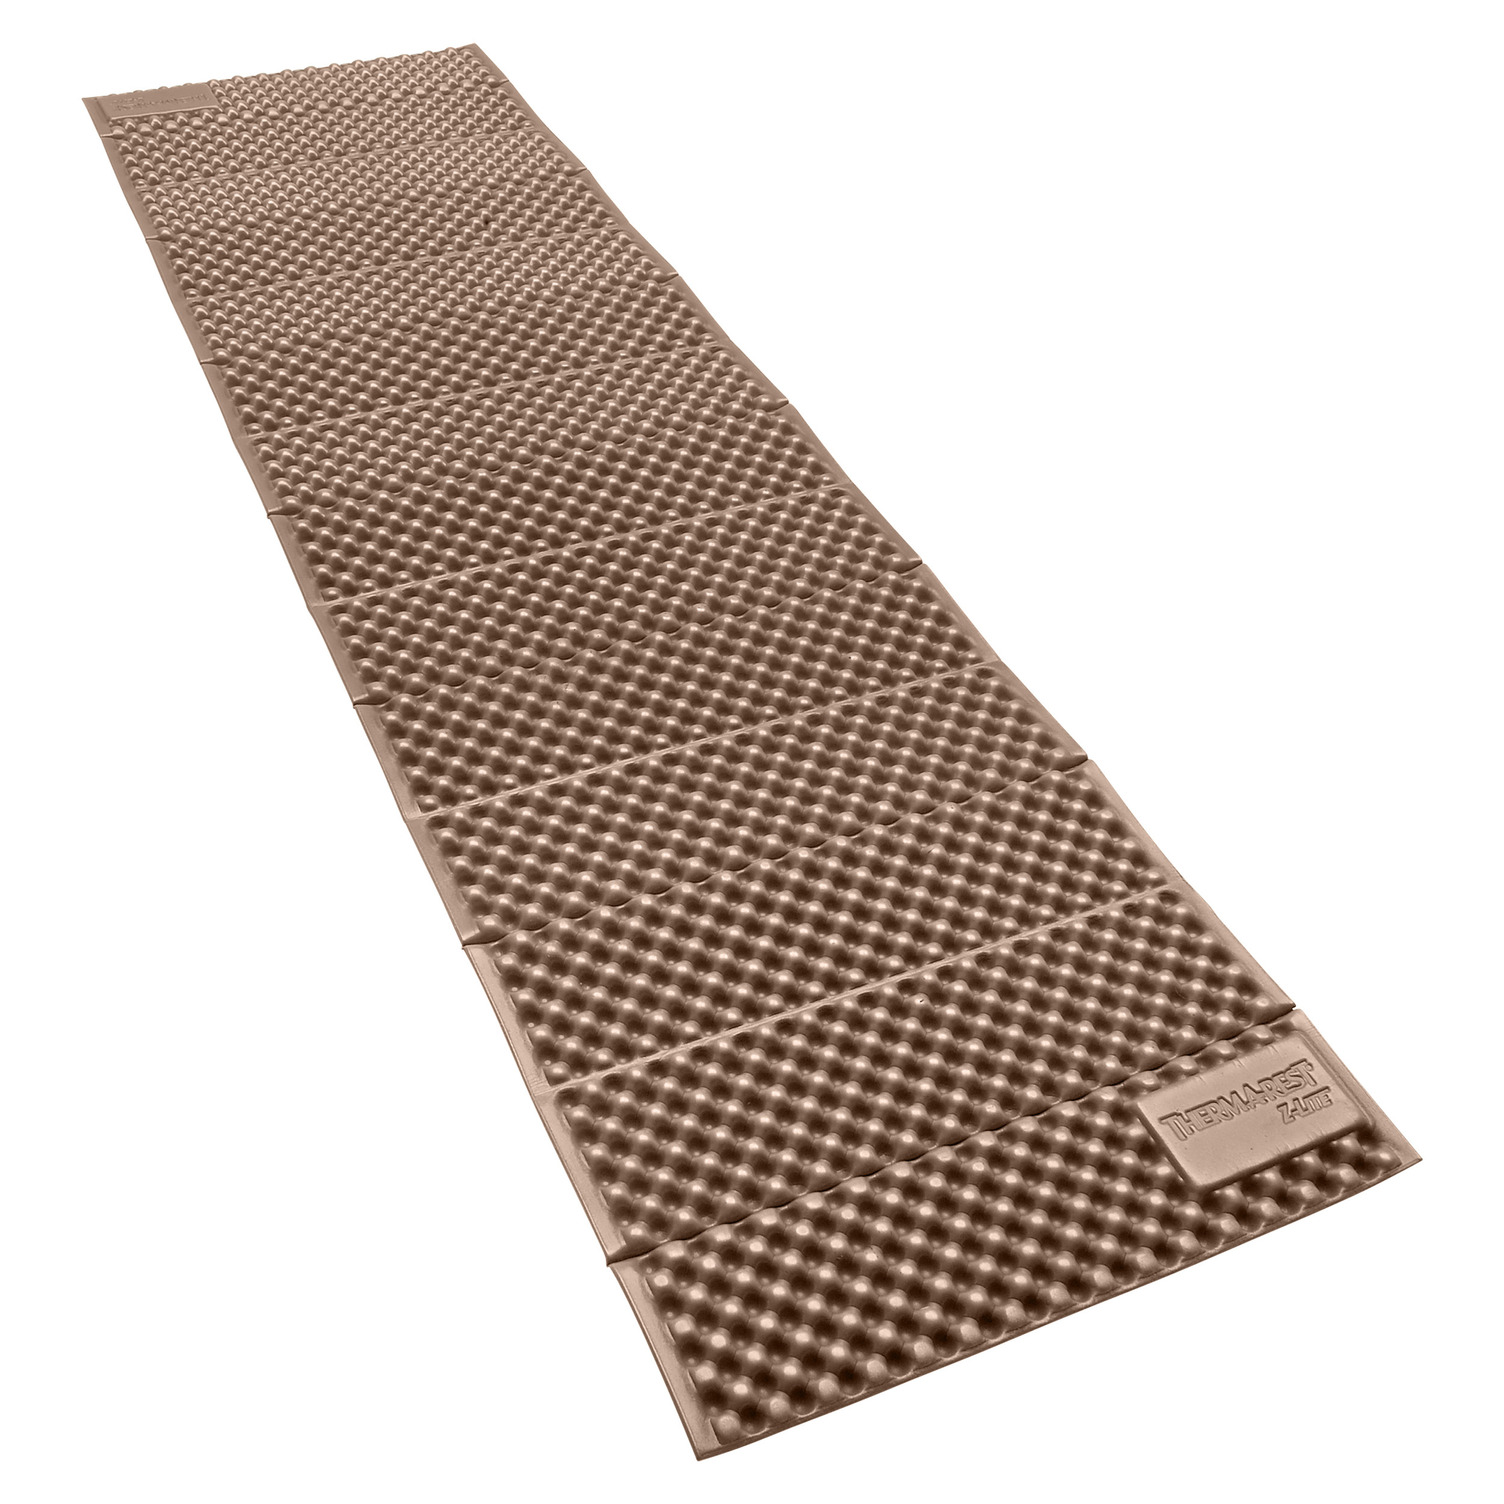 Image of Therm-a-Rest Z Lite Sleeping Pad - Regular - Oak/Anthracite